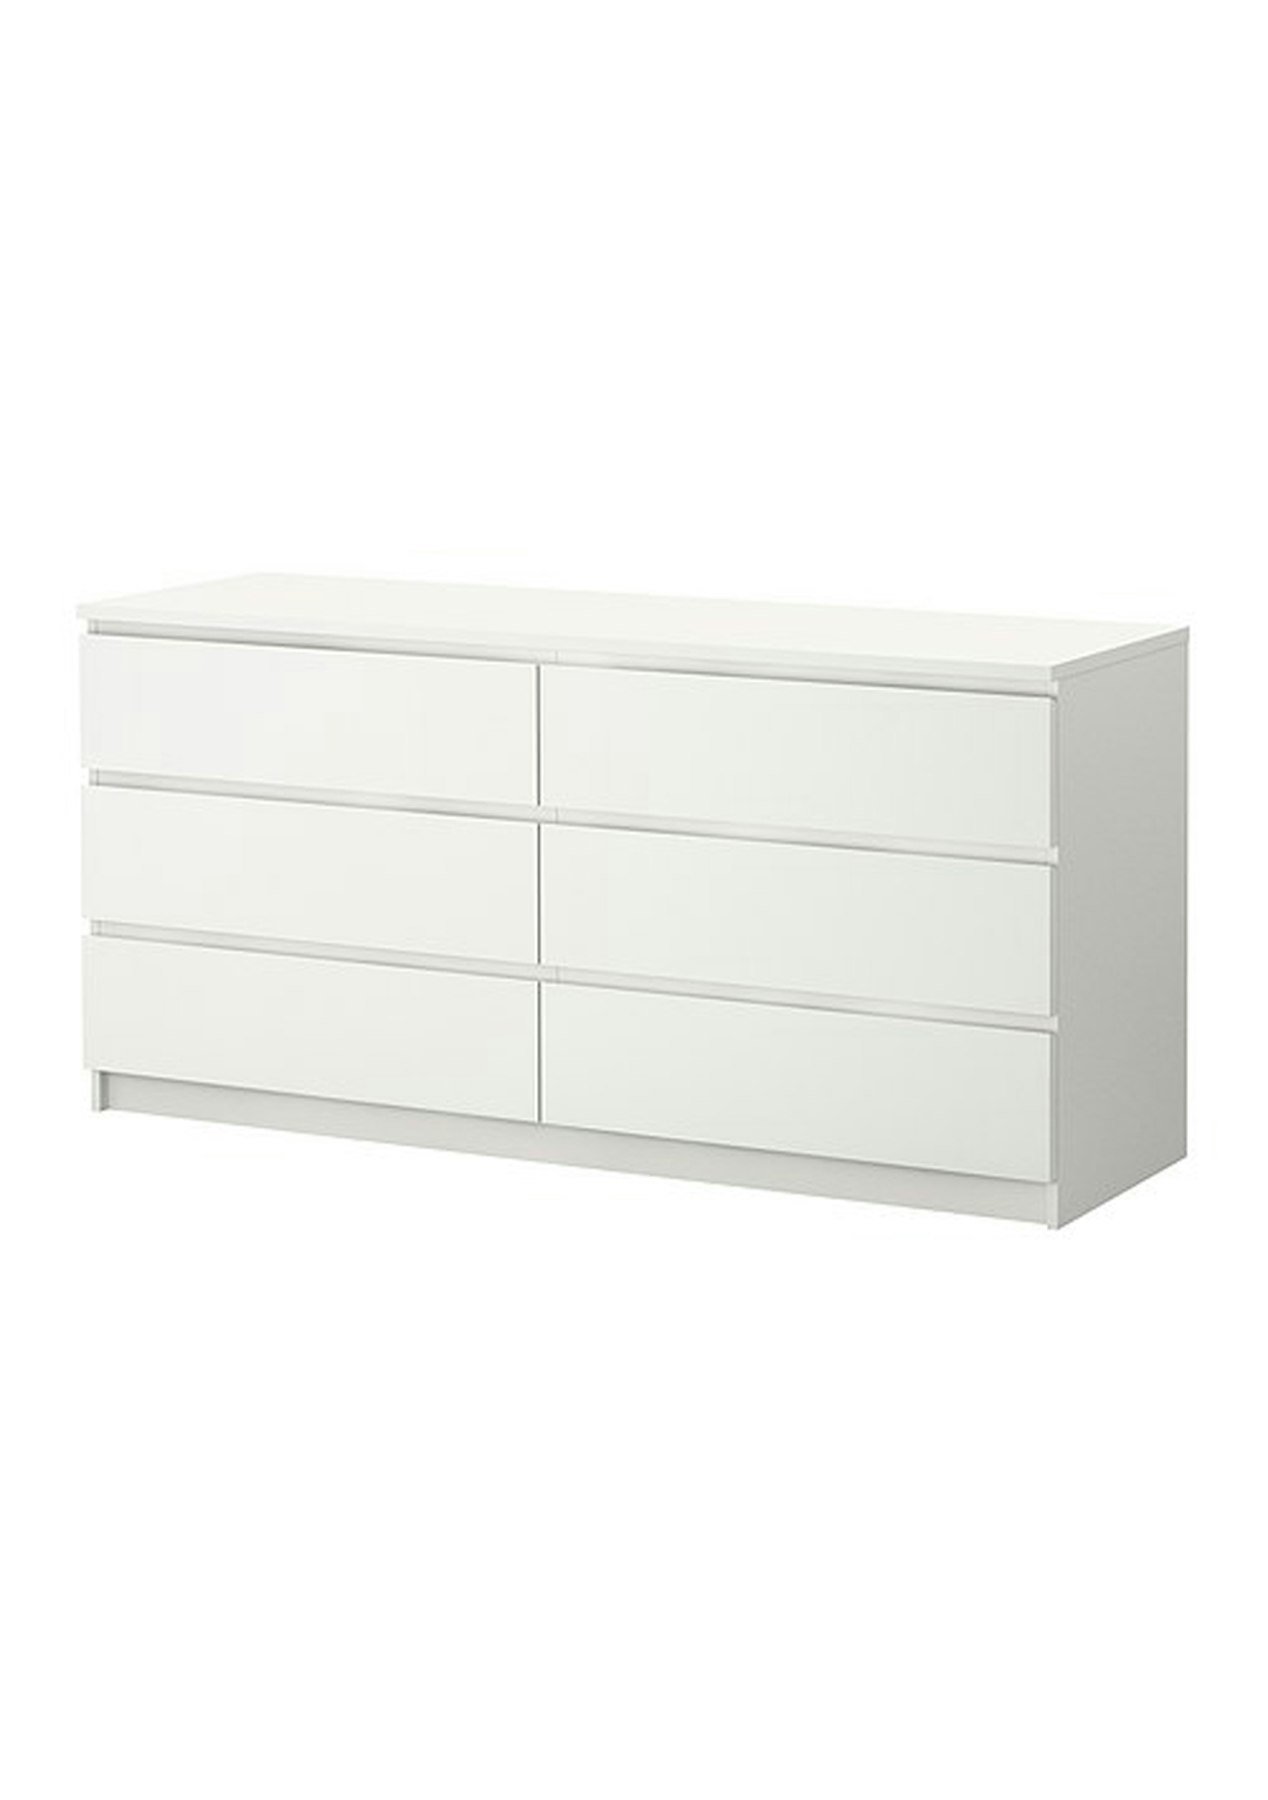 Ikea Malm Chest Of 6 Drawers 160x78cm White Affordable Ikea